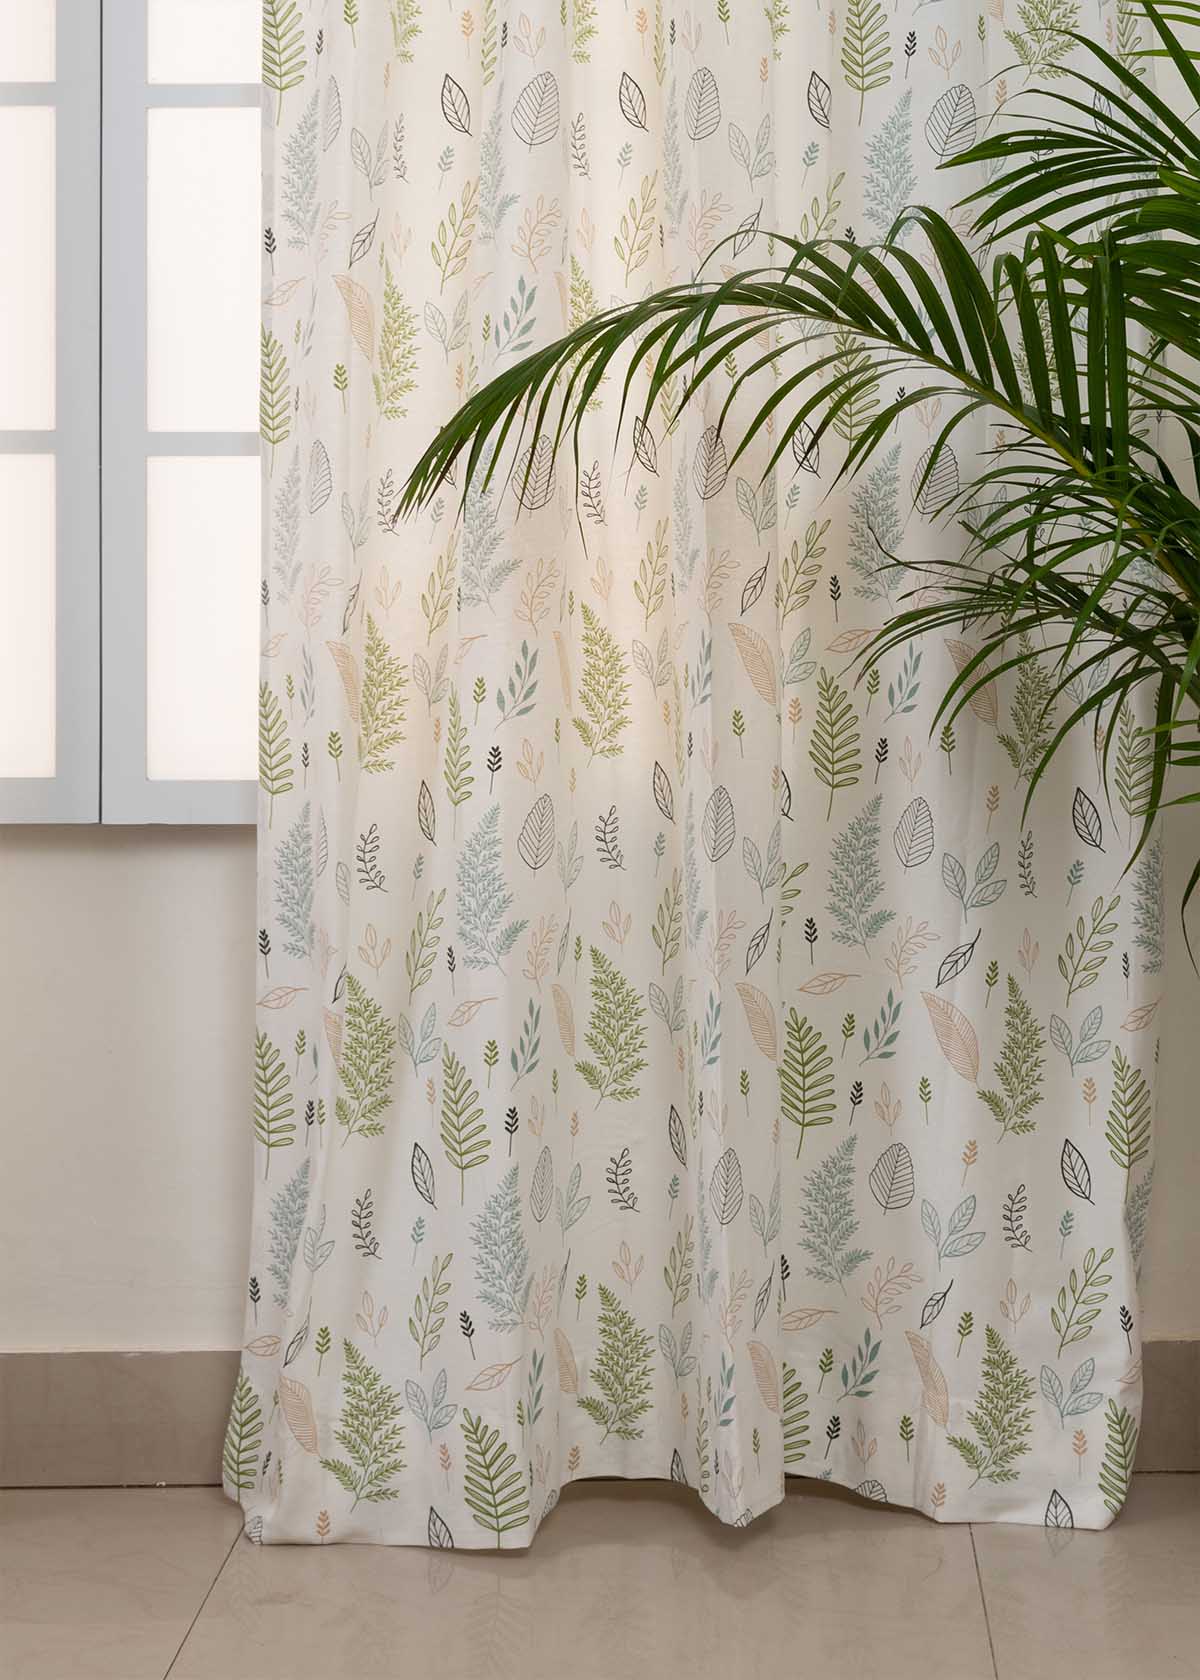 Rustling Leaves 100% Customizable Cotton floral curtain for bed room - Room darkening - Green